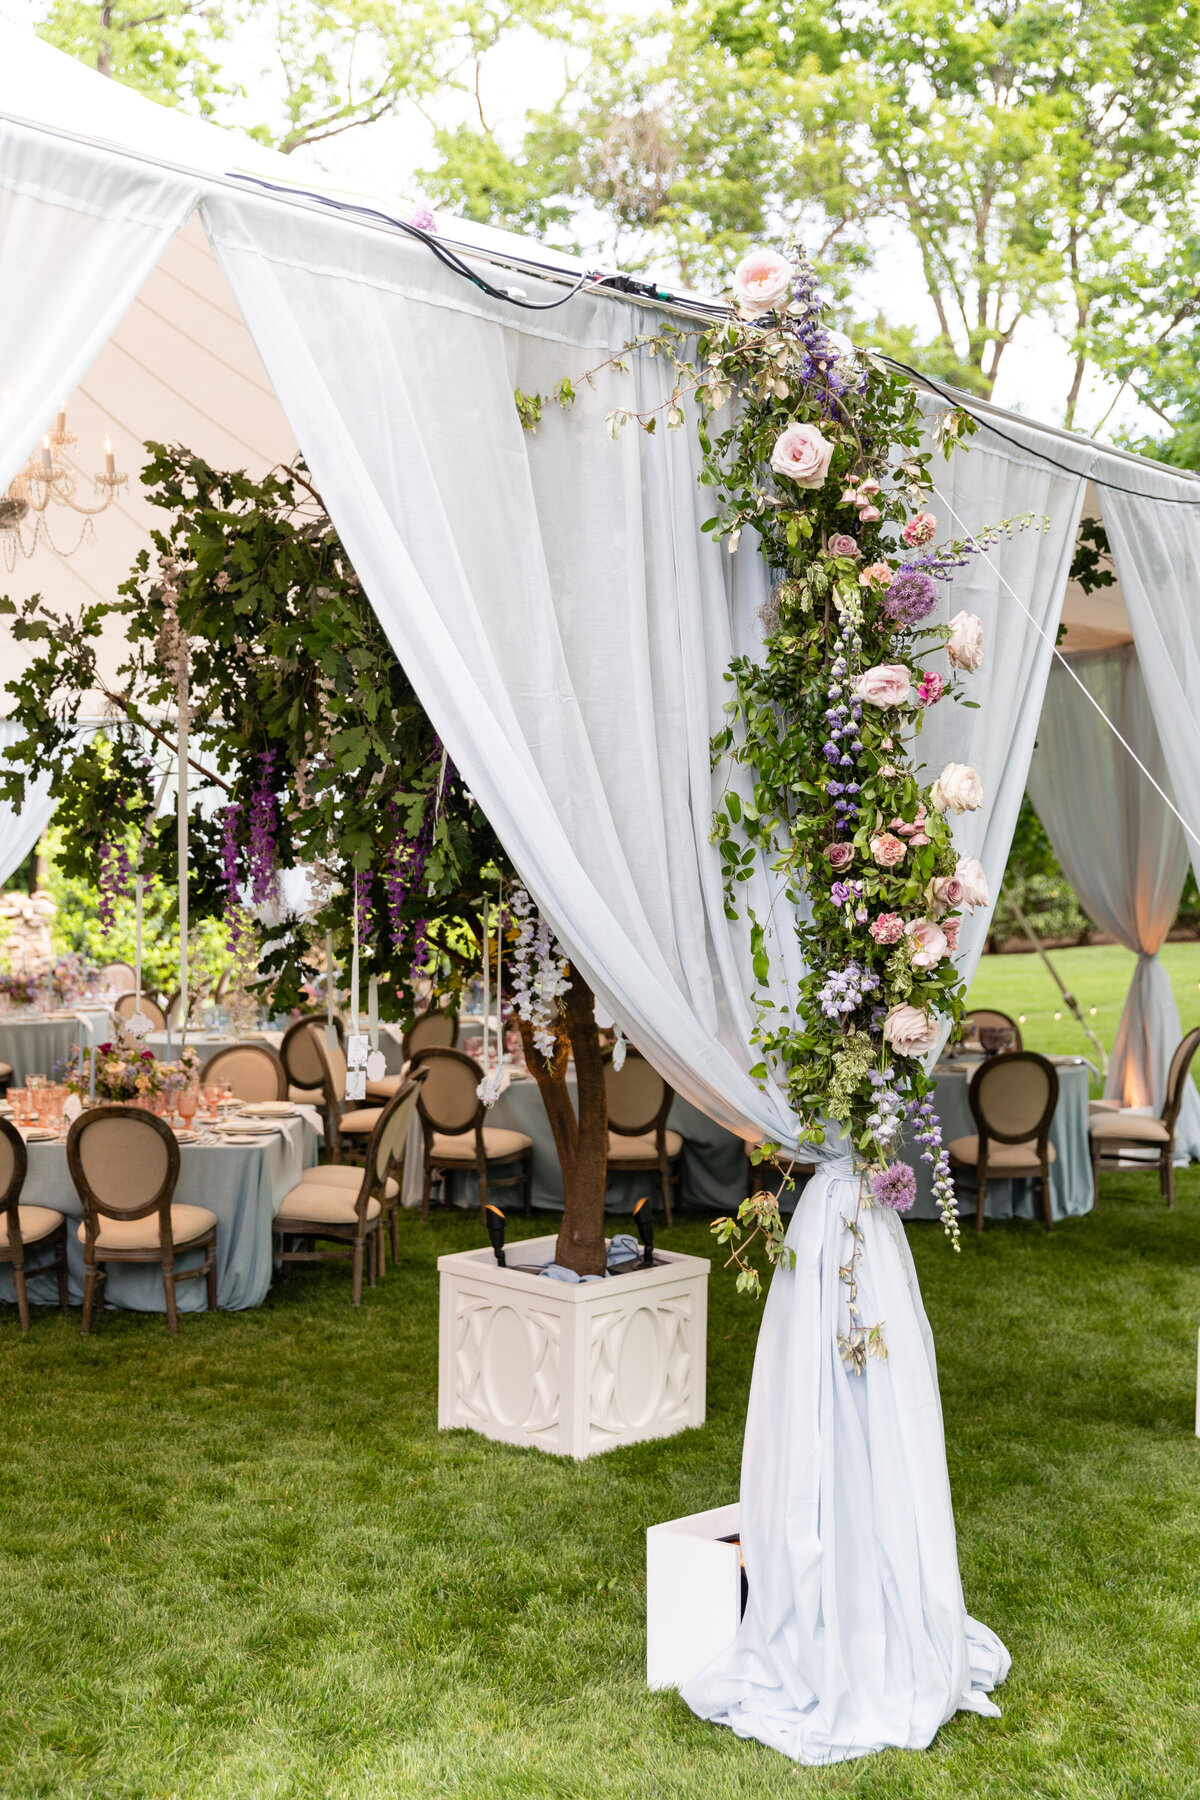 Tent entrance floral installation with blush garden roses, lavender delphinium, globe allium, and vines and greenery for a tented Bridgerton inspired engagement party at a private home in Nashville, TN. Flower by Tennessee based wedding floral design